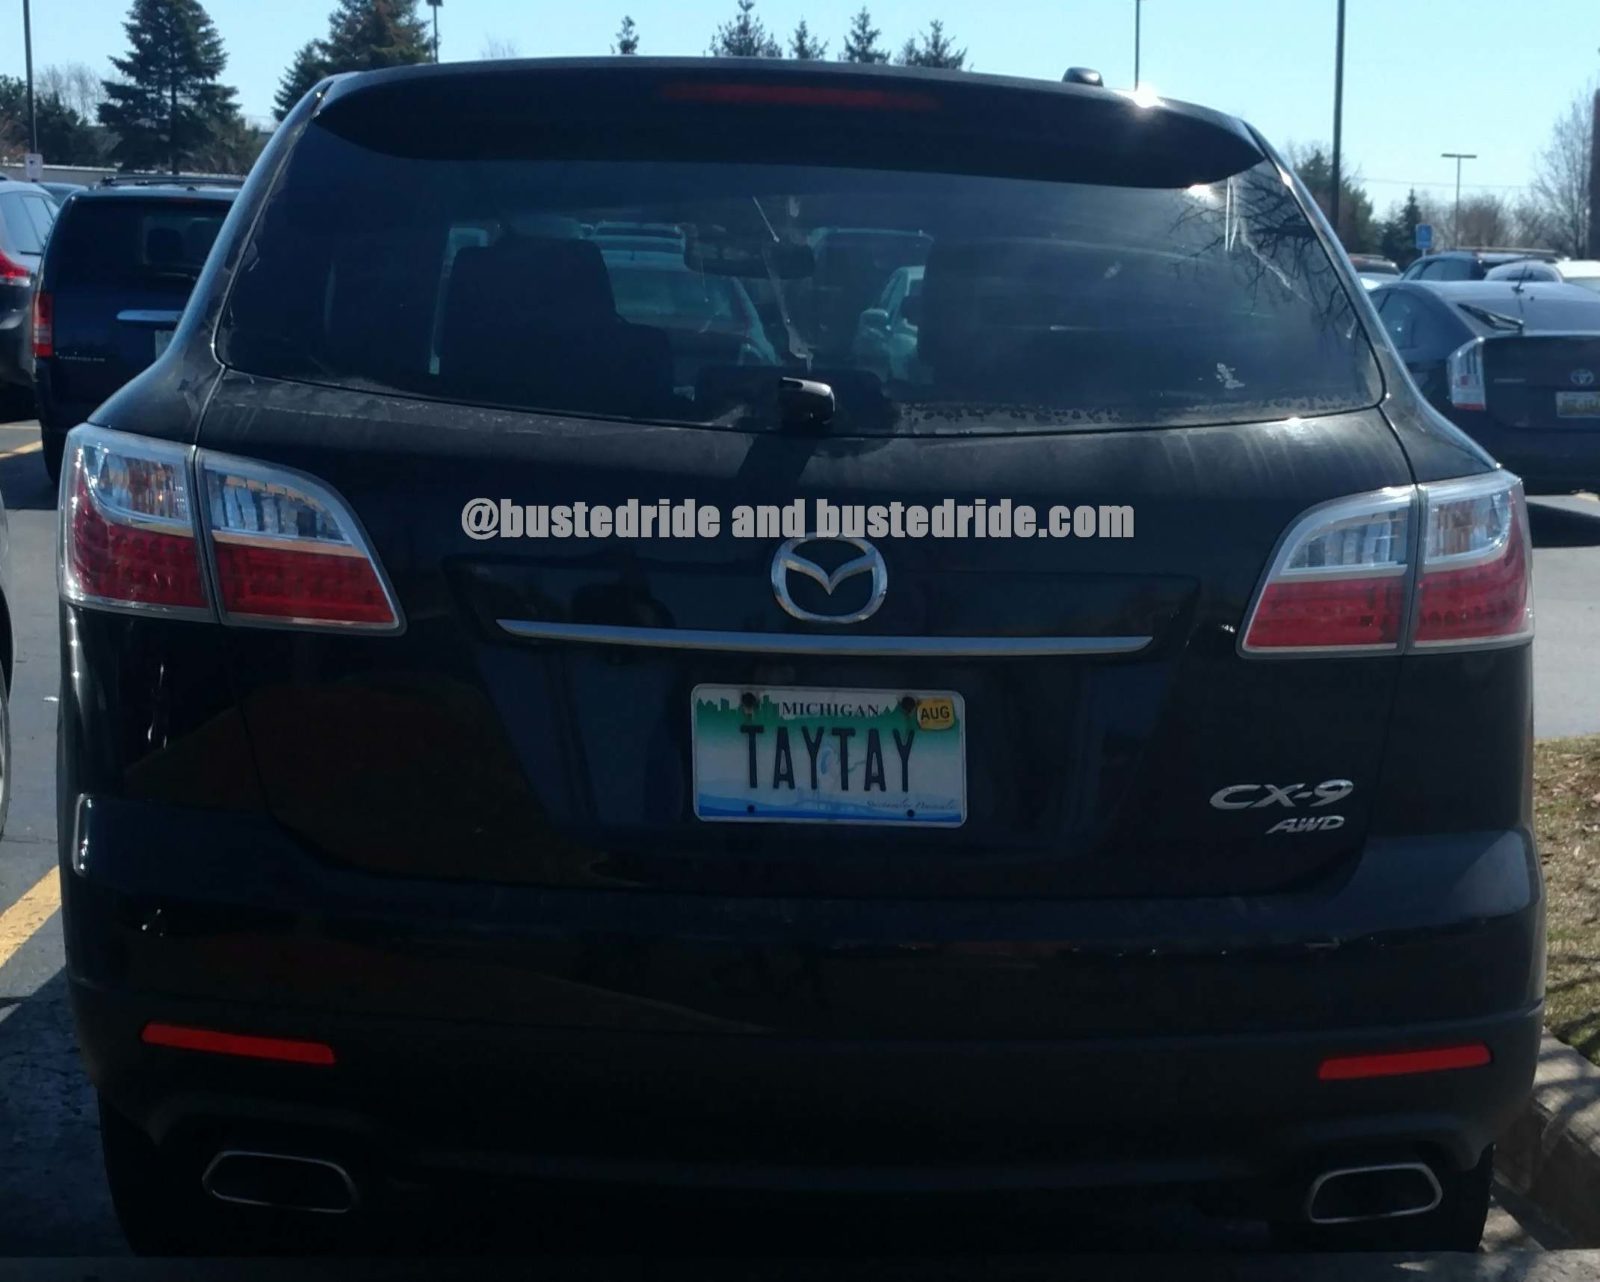 TAYTAY - Vanity License Plate by Busted Ride